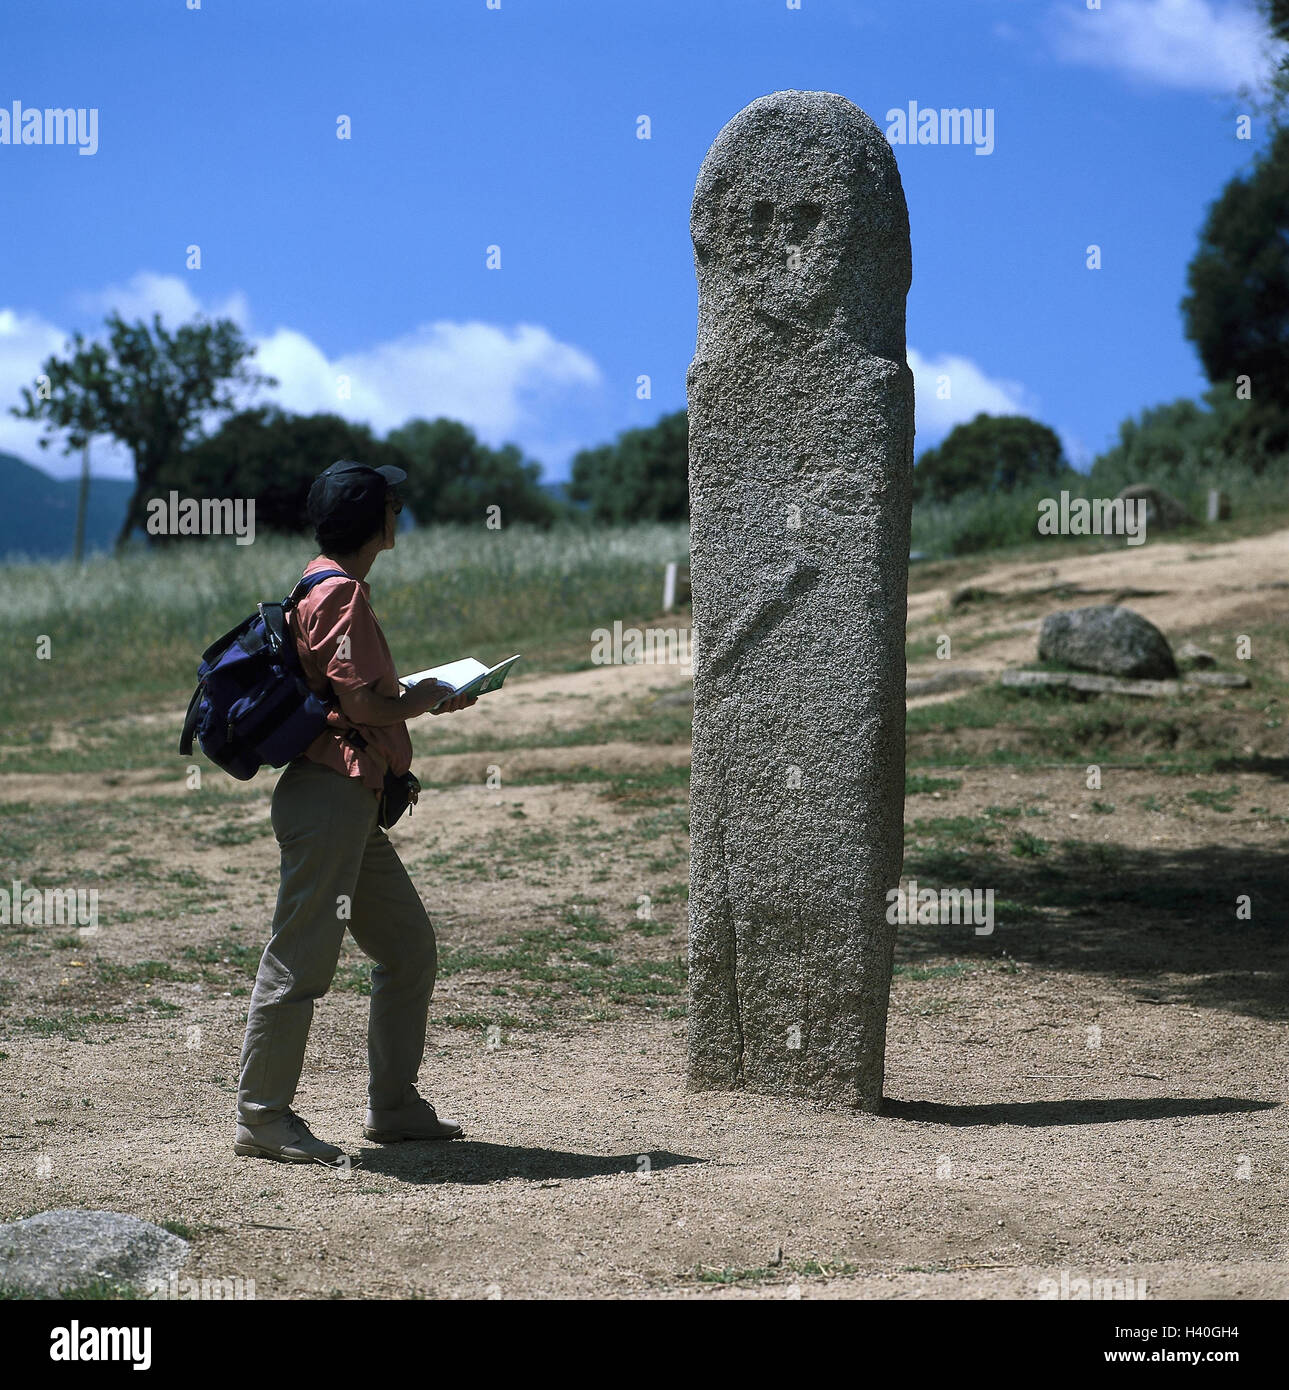 France, island Corsica, Filitosa, Menhir-Statue, tourist, island, Mediterranean island, Corsica, Taravo area, prehistoric finding site, menhir statue, megalithic culture, Neolithic Age, place of interest, to cultural travel, culture, Taravo valley Stock Photo